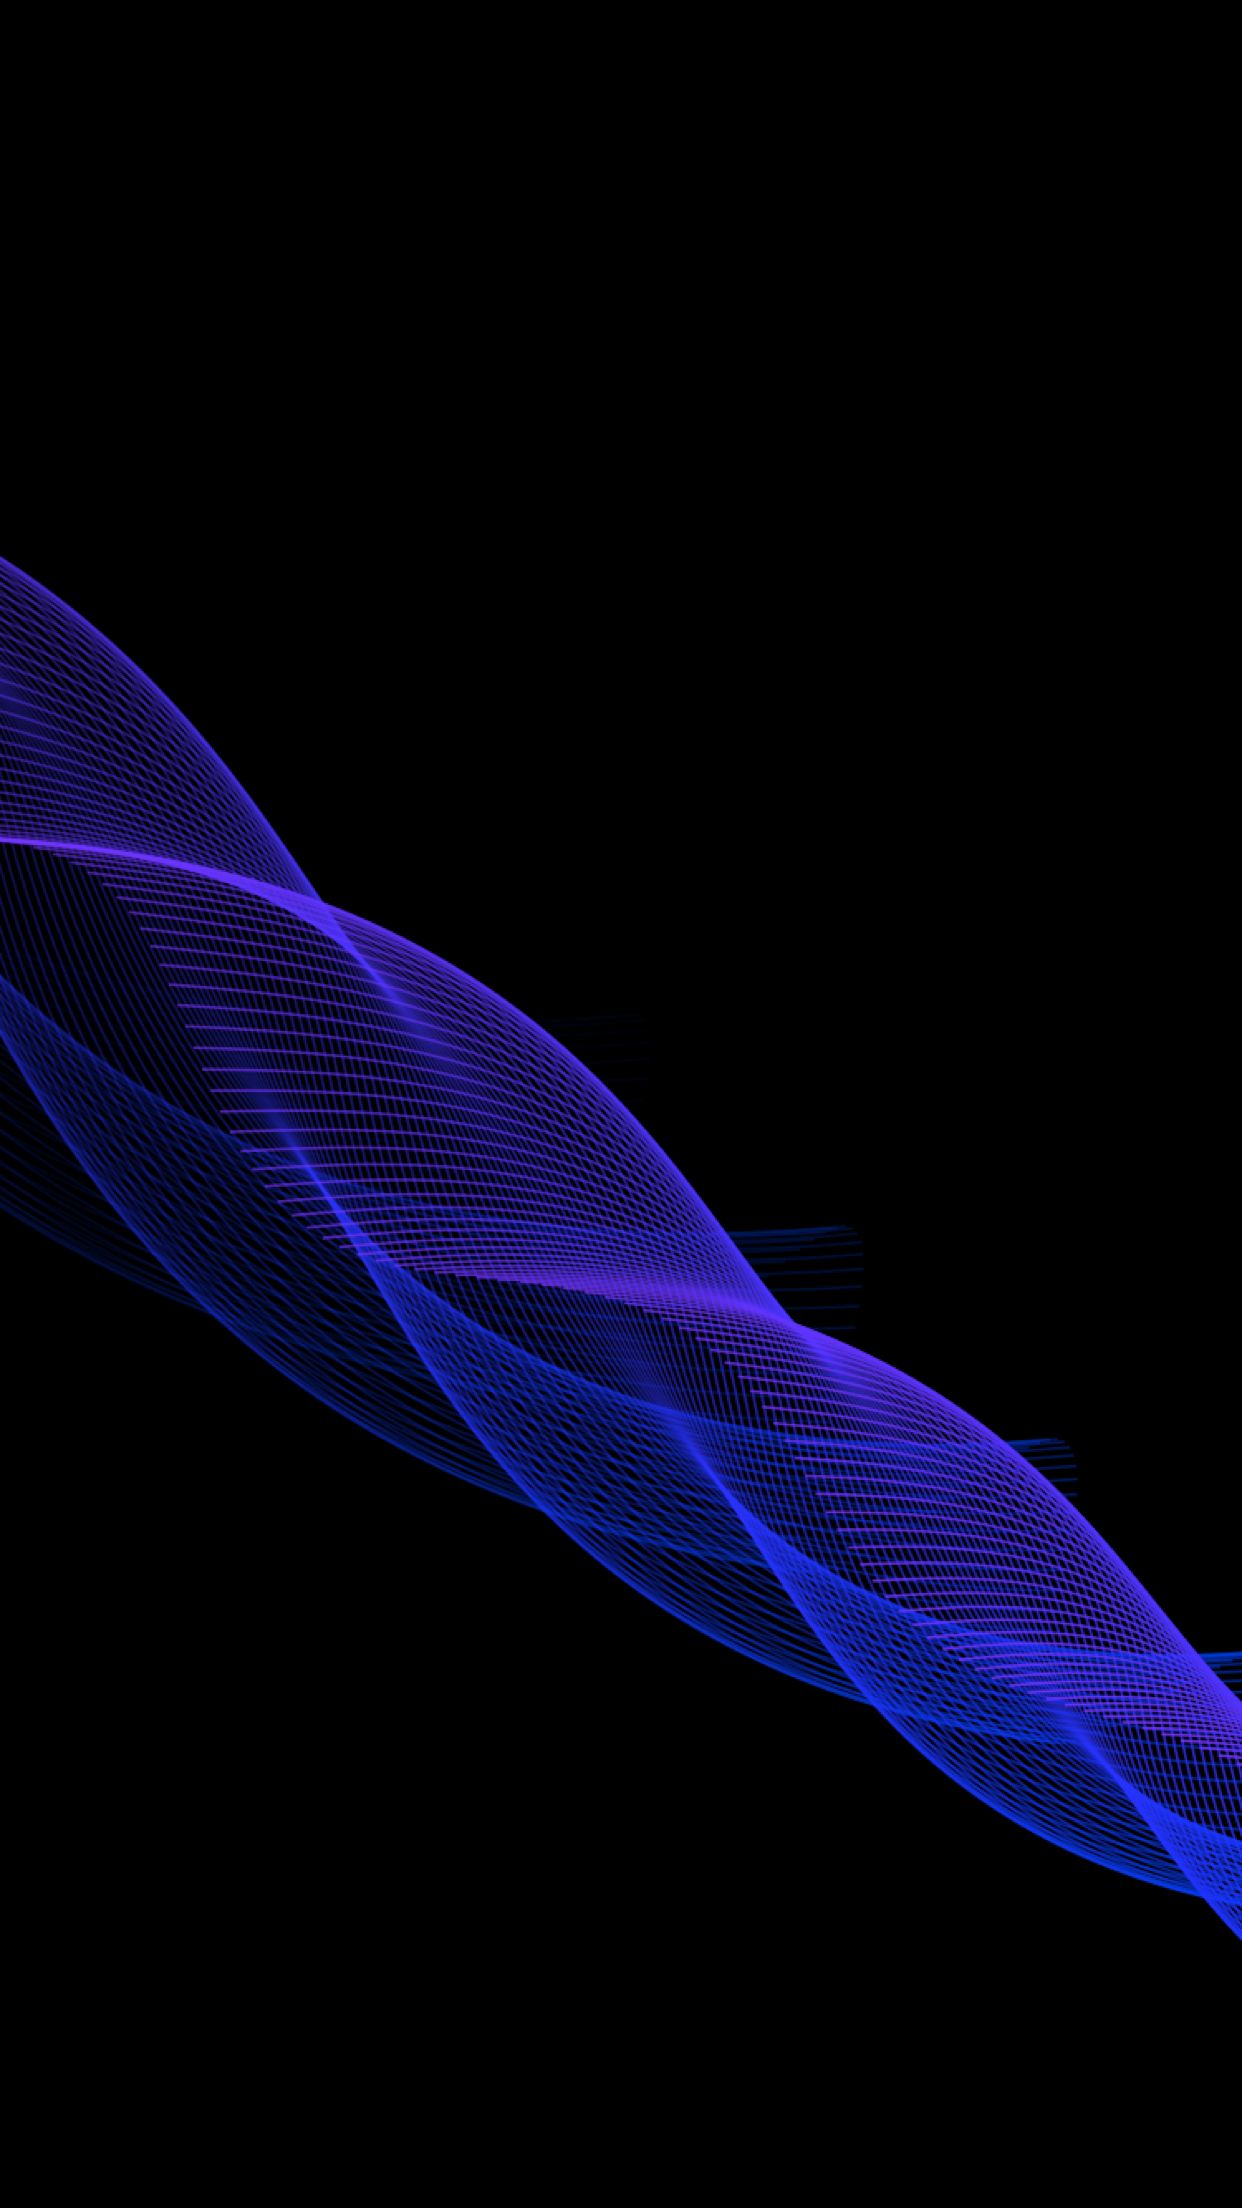 Blue Amoled Wallpapers - Wallpaper Cave